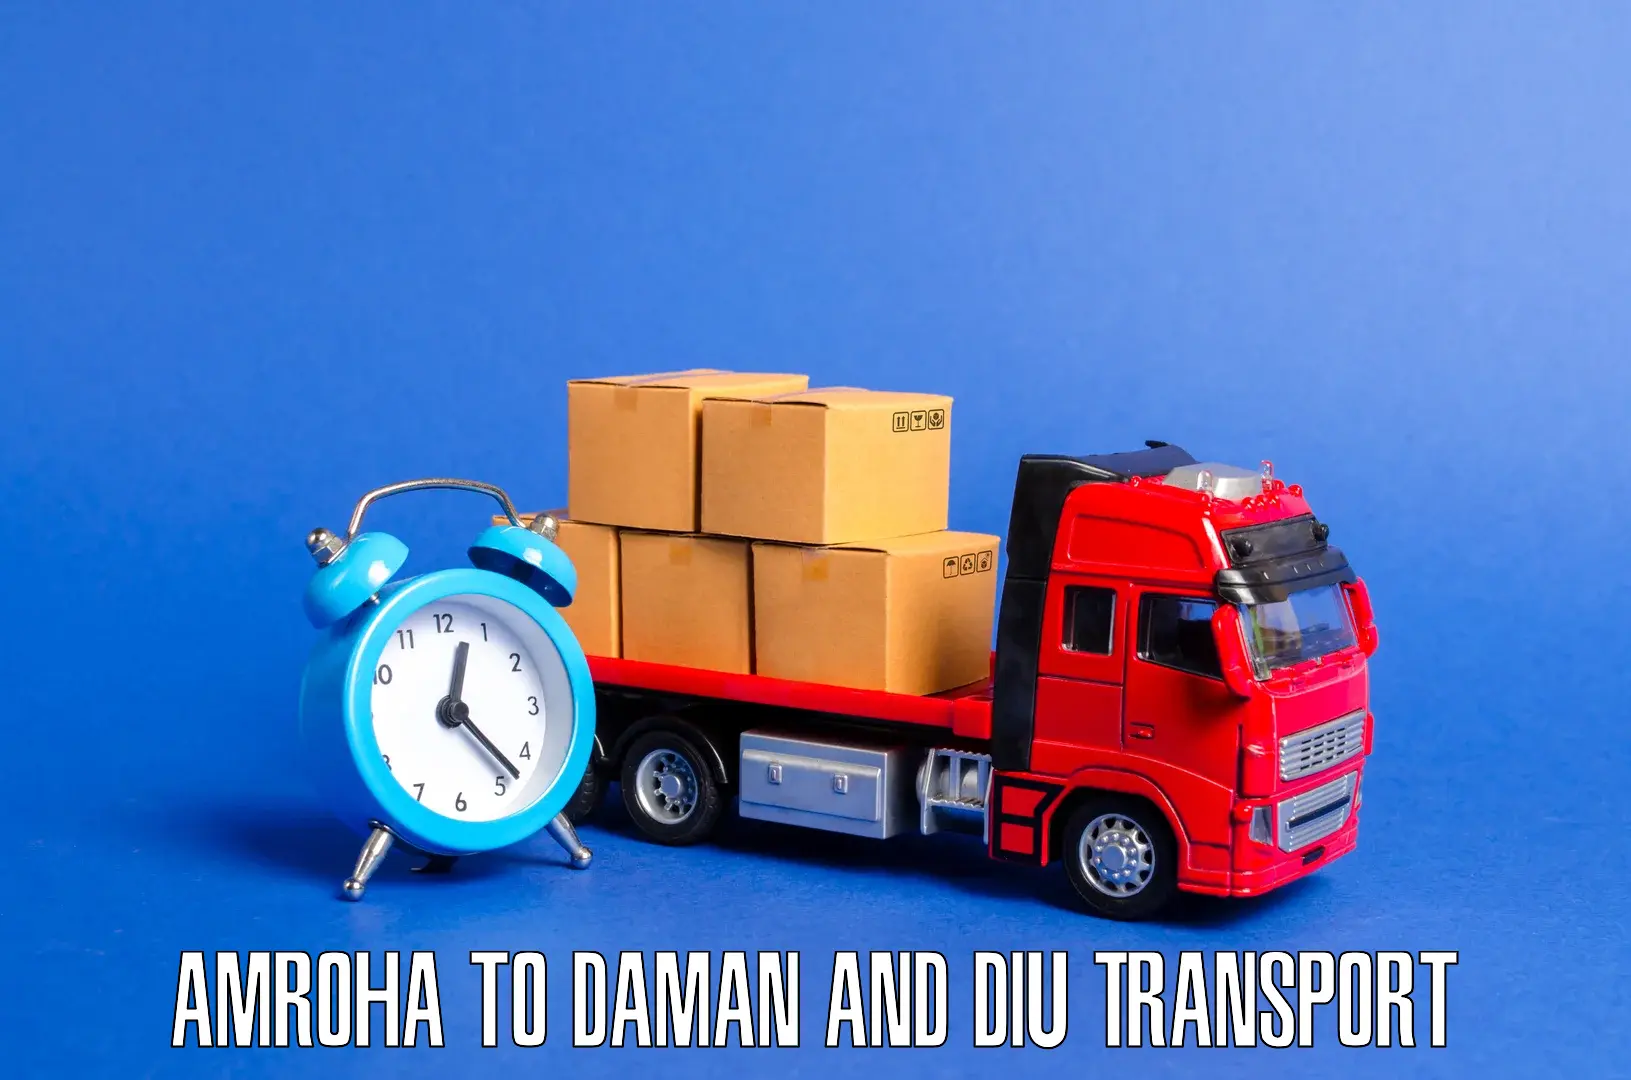 Delivery service Amroha to Daman and Diu